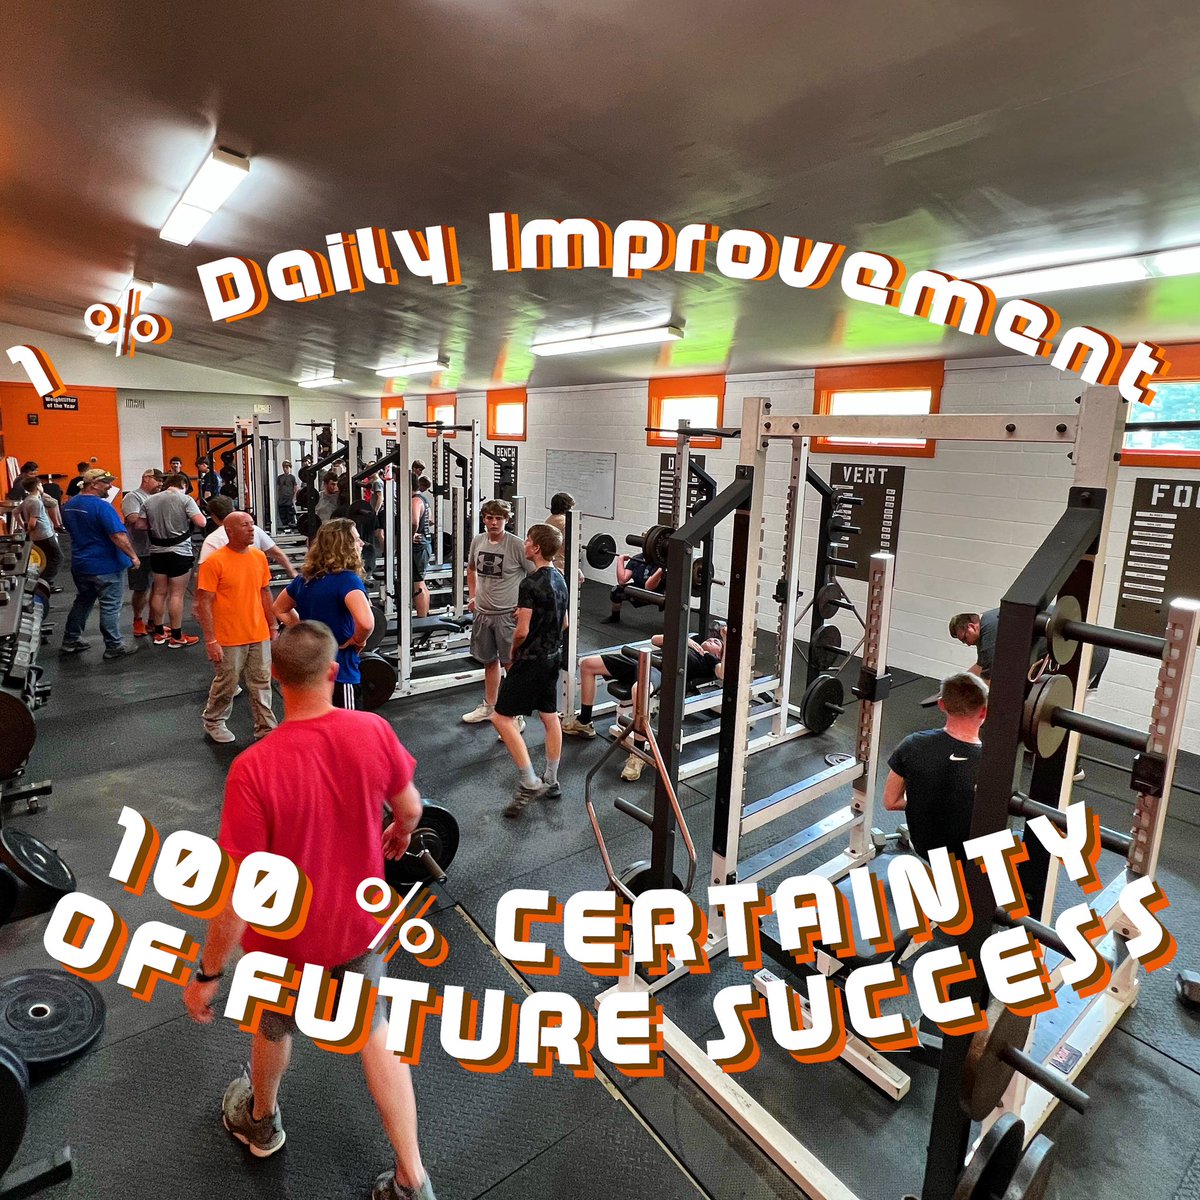 1 % better is the goal everyday!! Let’s go!
#BulldogFootball #EastPalestine #BulldogTradition #Bulldogs #Epstrong #onepercent #gothedistance #weighttraining #highschoolfootball